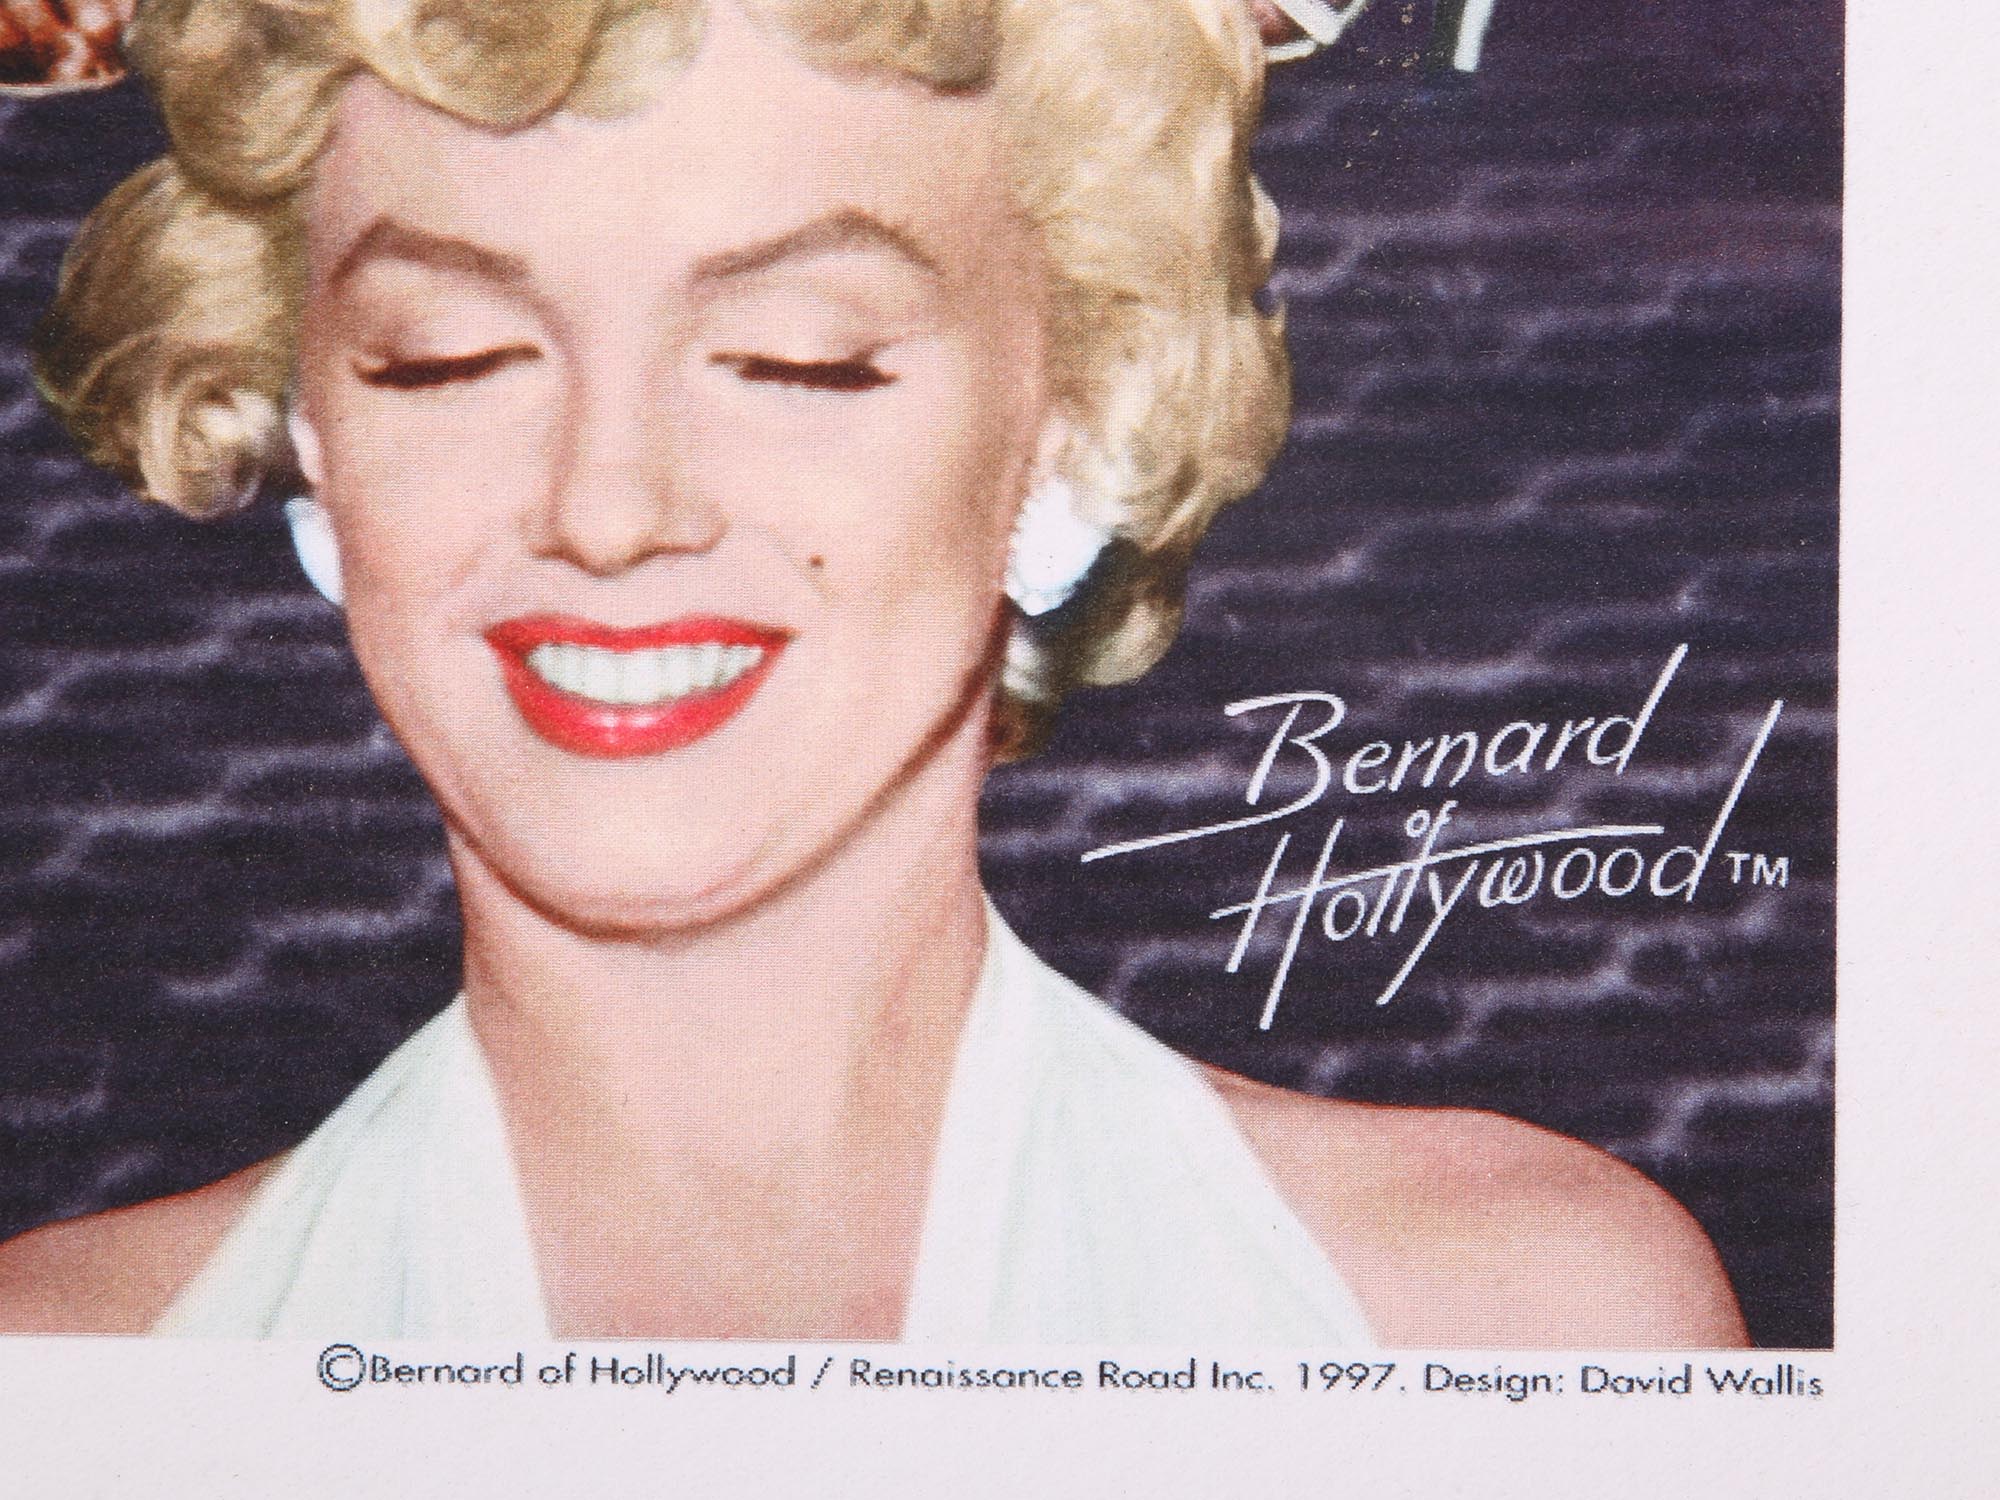 RARE COLLAGE PHOTO MONROE BY BERNARD OF HOLLYWOOD PIC-1